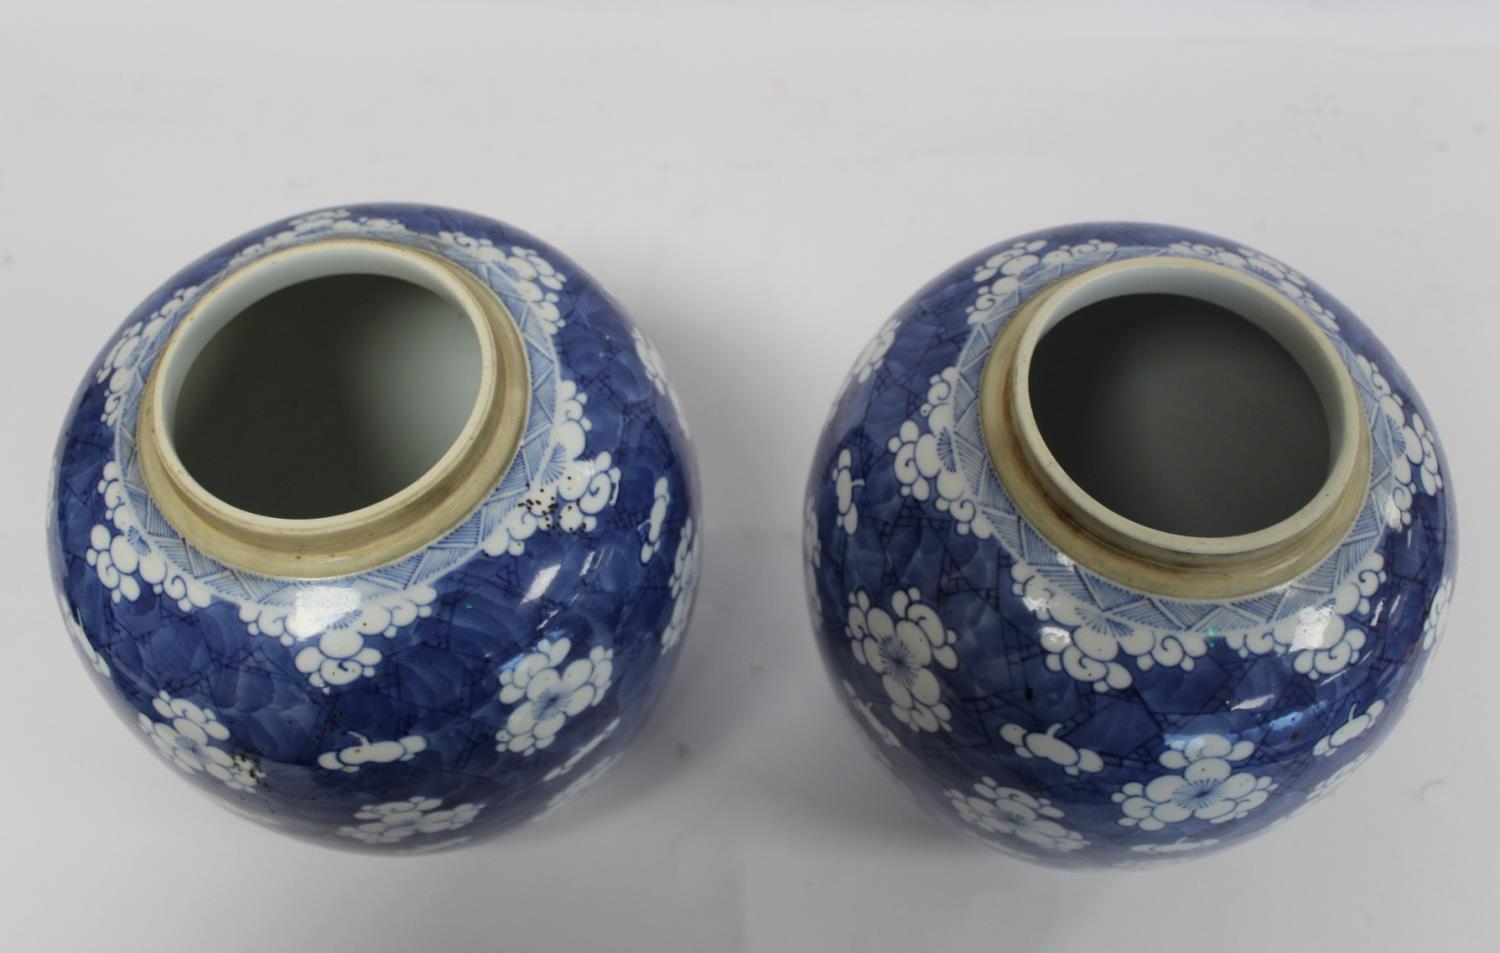 Pair of 19th century Chinese porcelain covered ginger jars of ovoid form with underglaze blue - Image 6 of 28